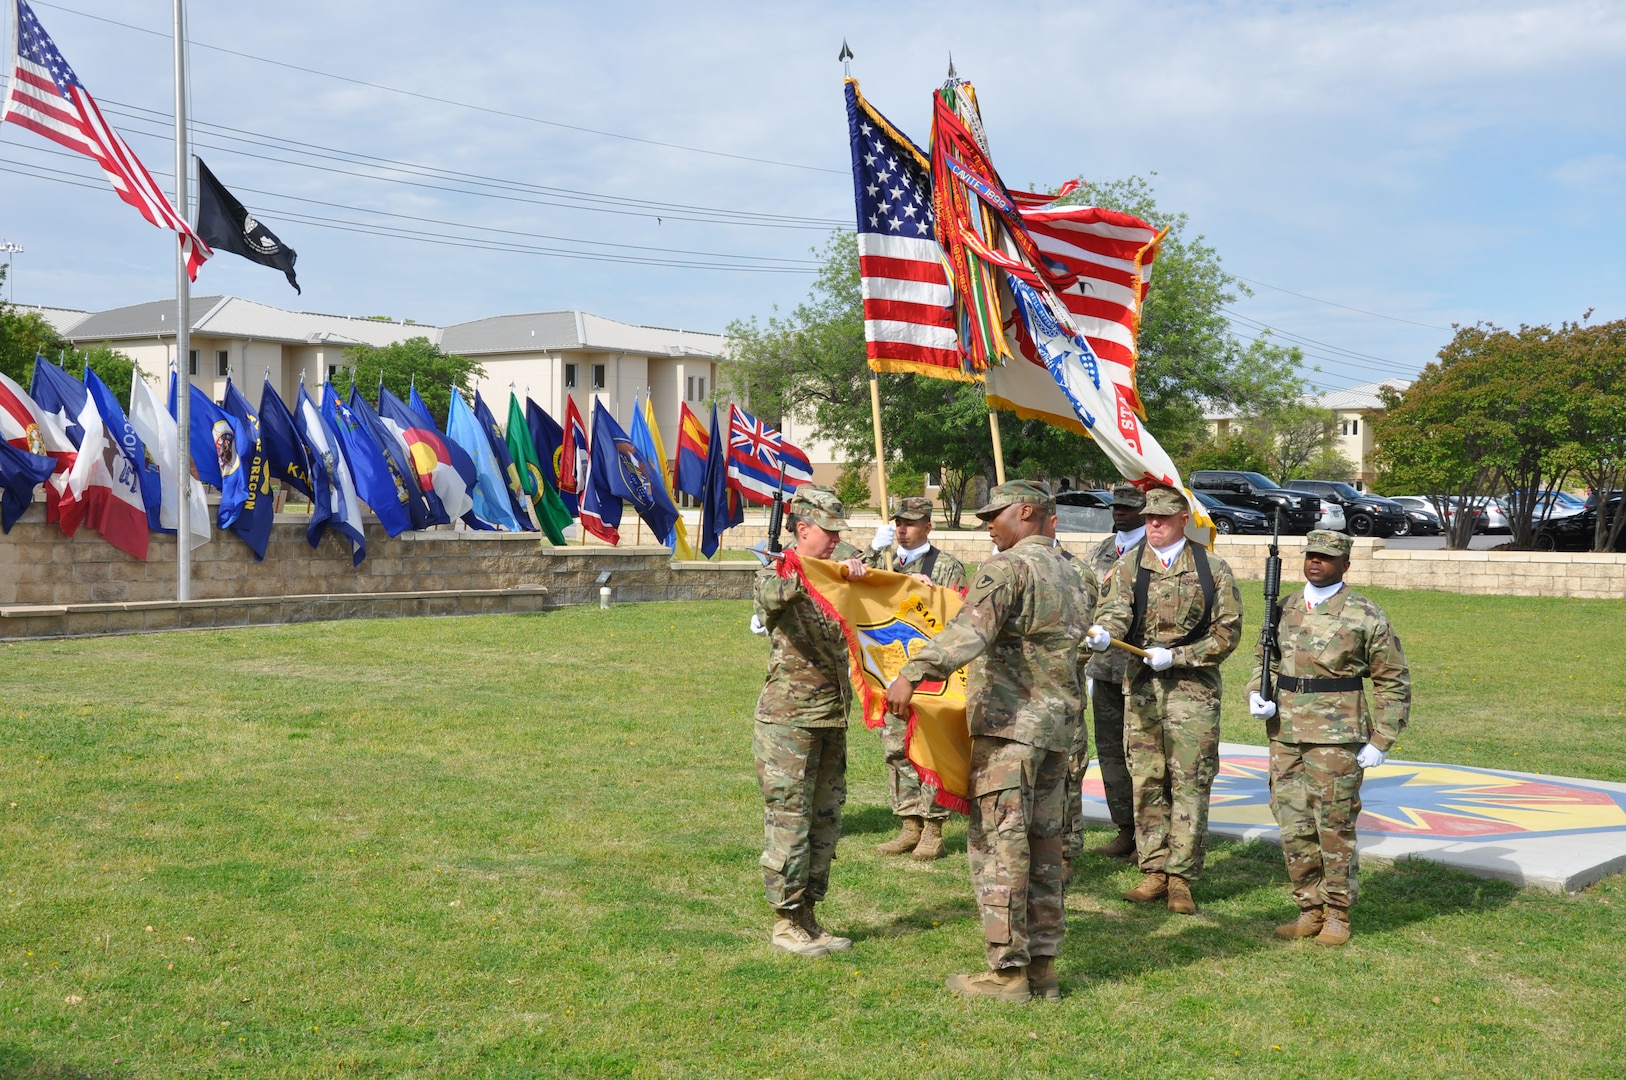 Col. Lynda Armer (left) and Command Sgt. Maj. Darnyell Parker uncase the 418th Contracting Support Brigade colors during a ceremony April 20 at Fort Hood, Texas. The uncasing of organizational colors signals the return from deployment to Afghanistan for the unit. Armer is the 418th CSB commander and Parker is the brigade command sergeant major.